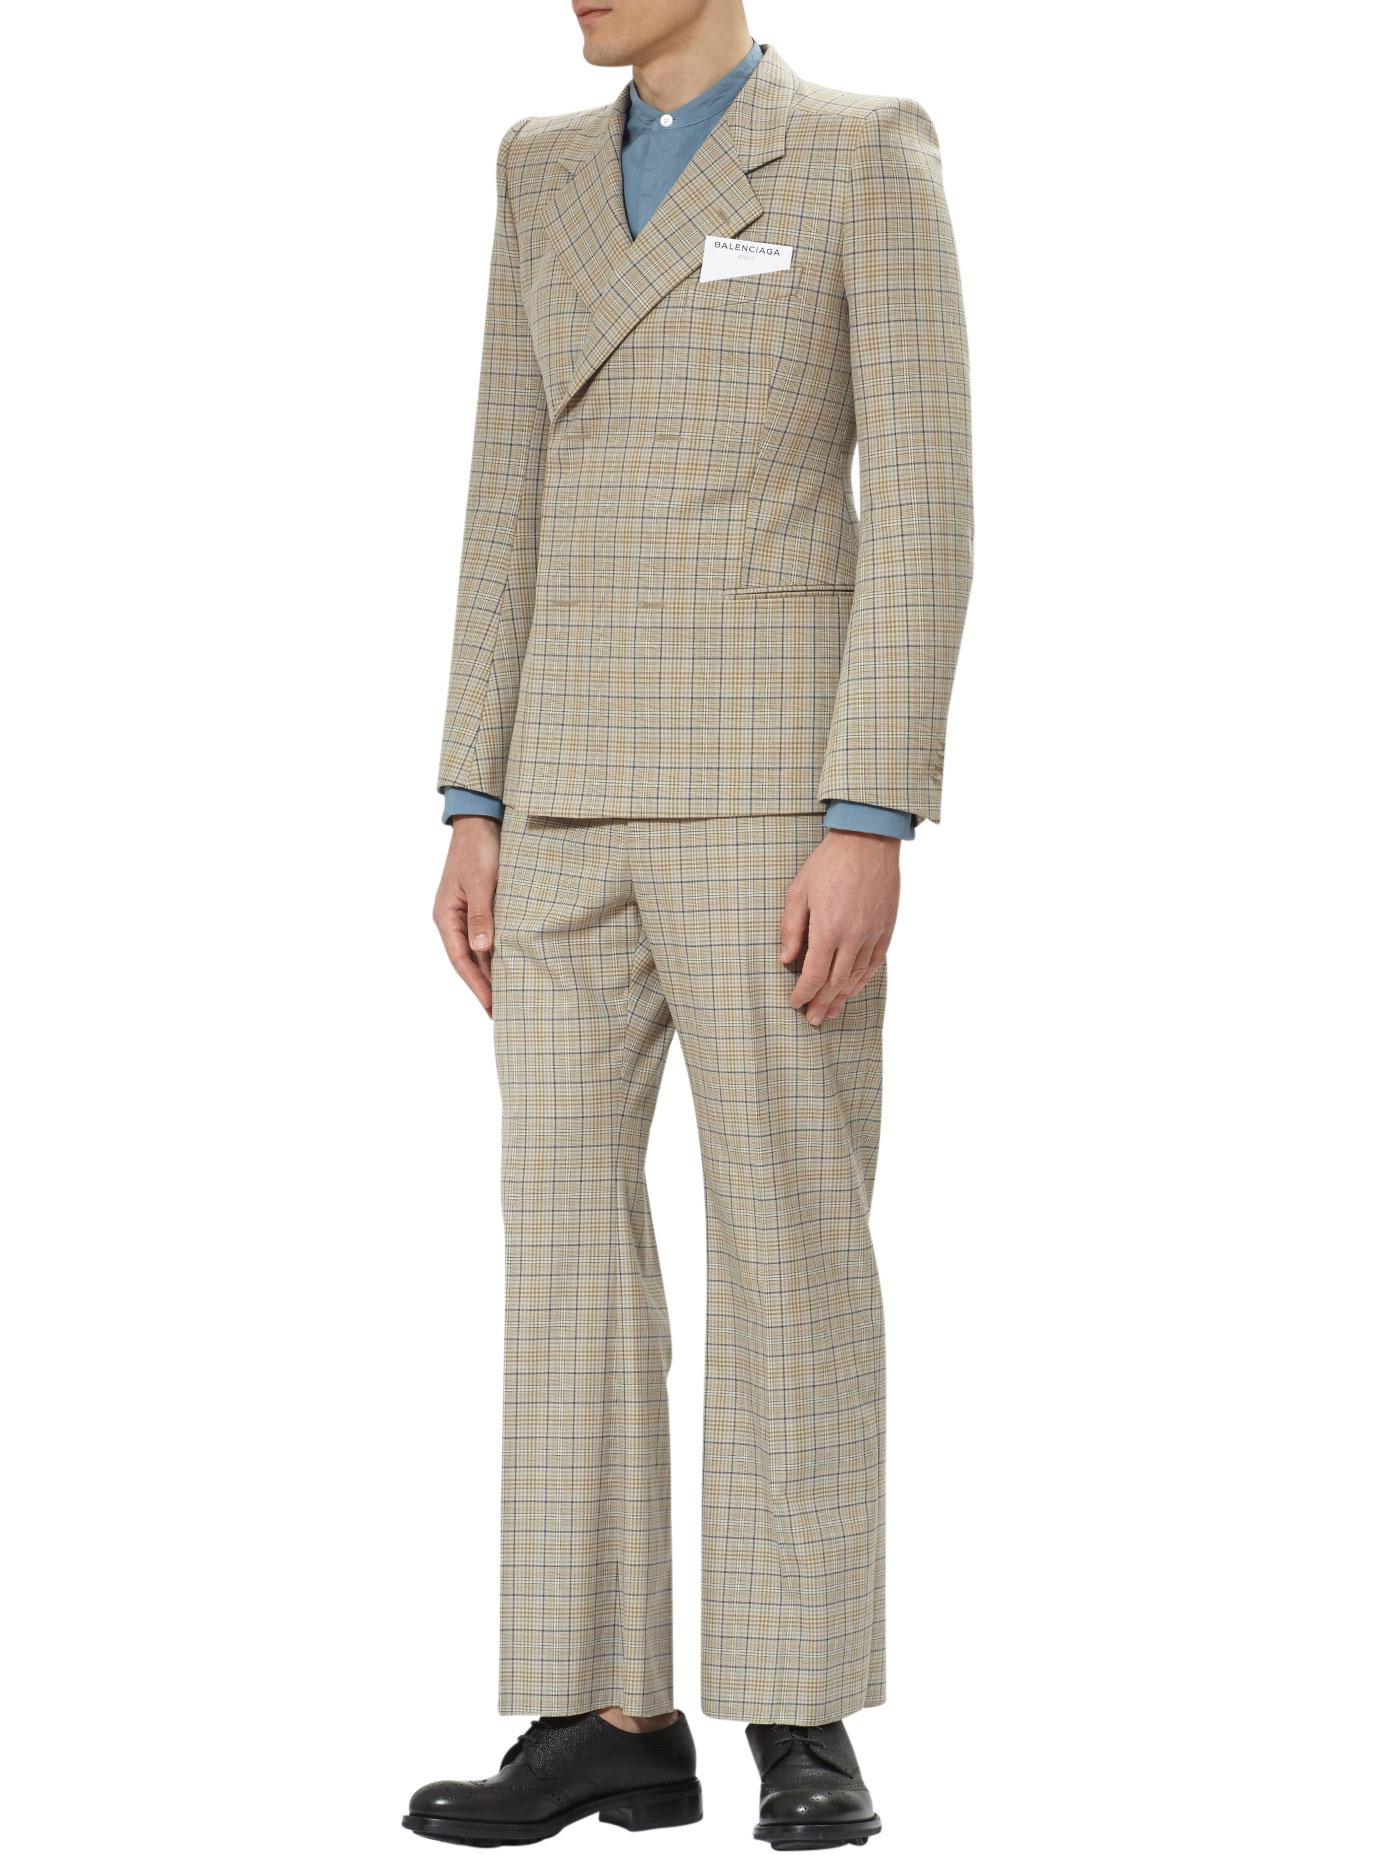 Balenciaga Cotton Prince Of Wales Trousers in Beige/Checked (Natural) for  Men - Lyst